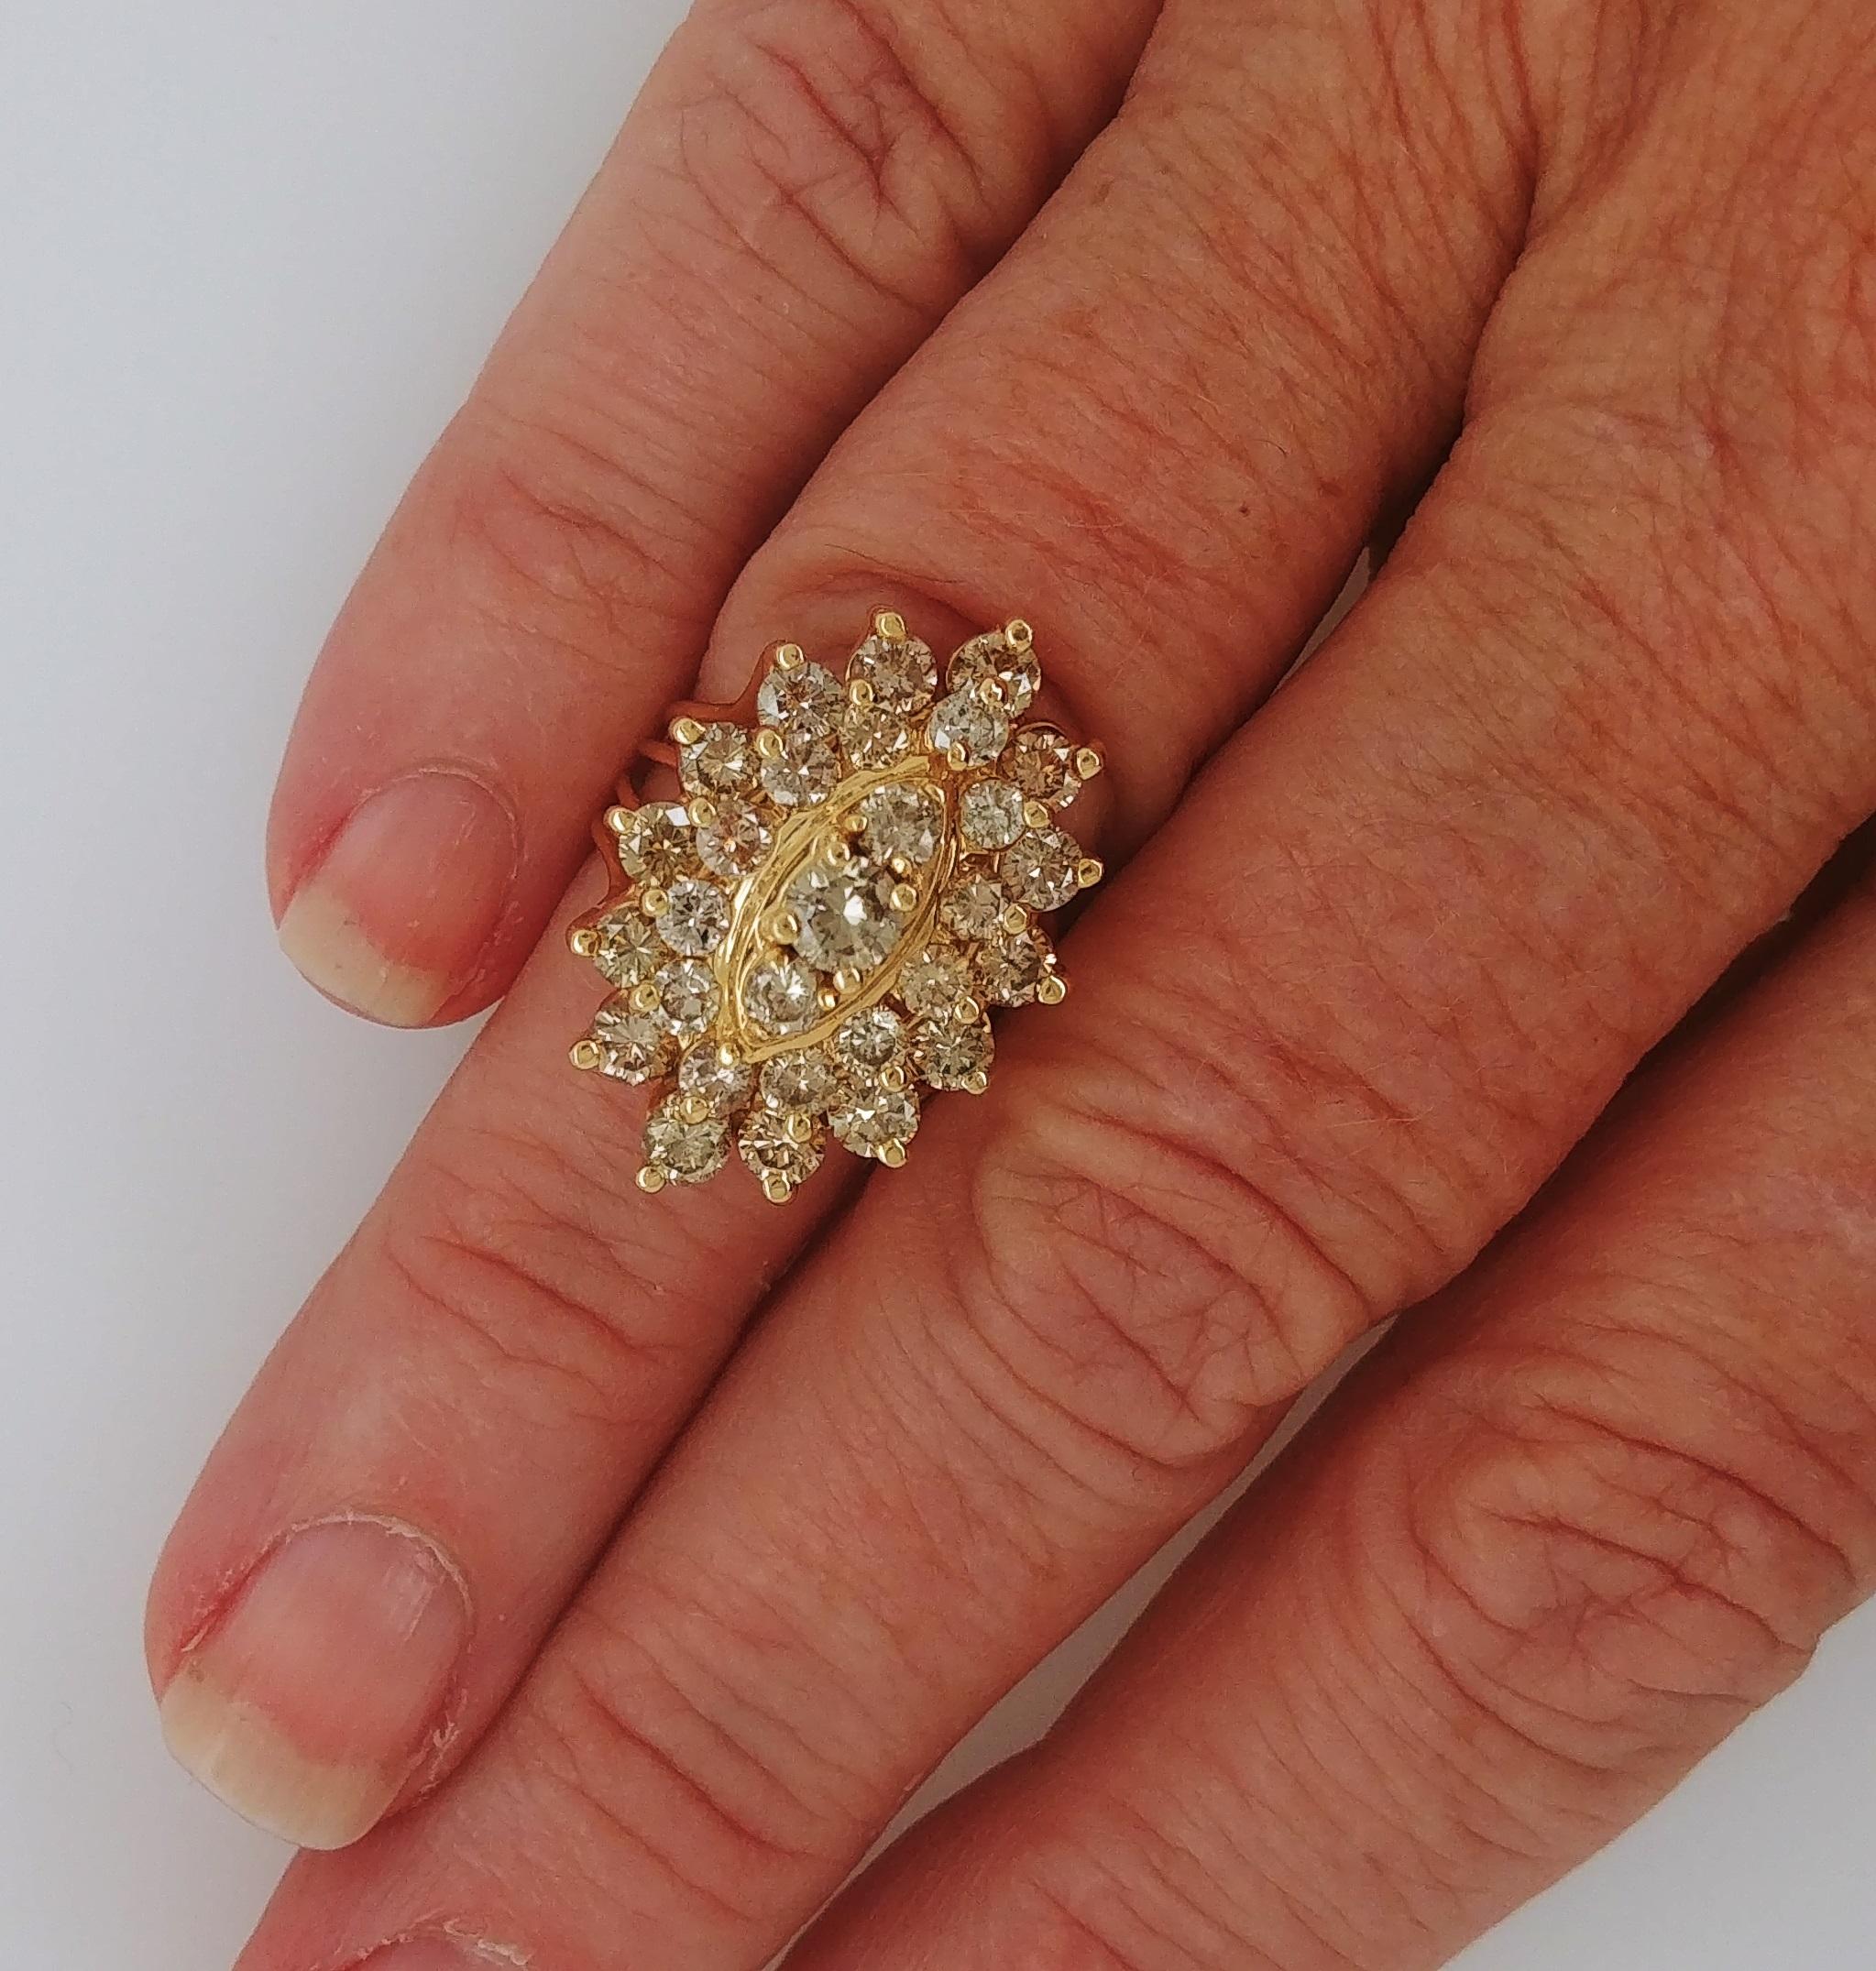 Ladies Marquise Shaped Round Diamonds Cluster Fashion Ring stamped 14K in Yellow Gold weighs 17.7 grams and features 3 tiers of prong set round brilliant cut diamonds with an estimated 2 carats total weight. Ring is almost one inch in length